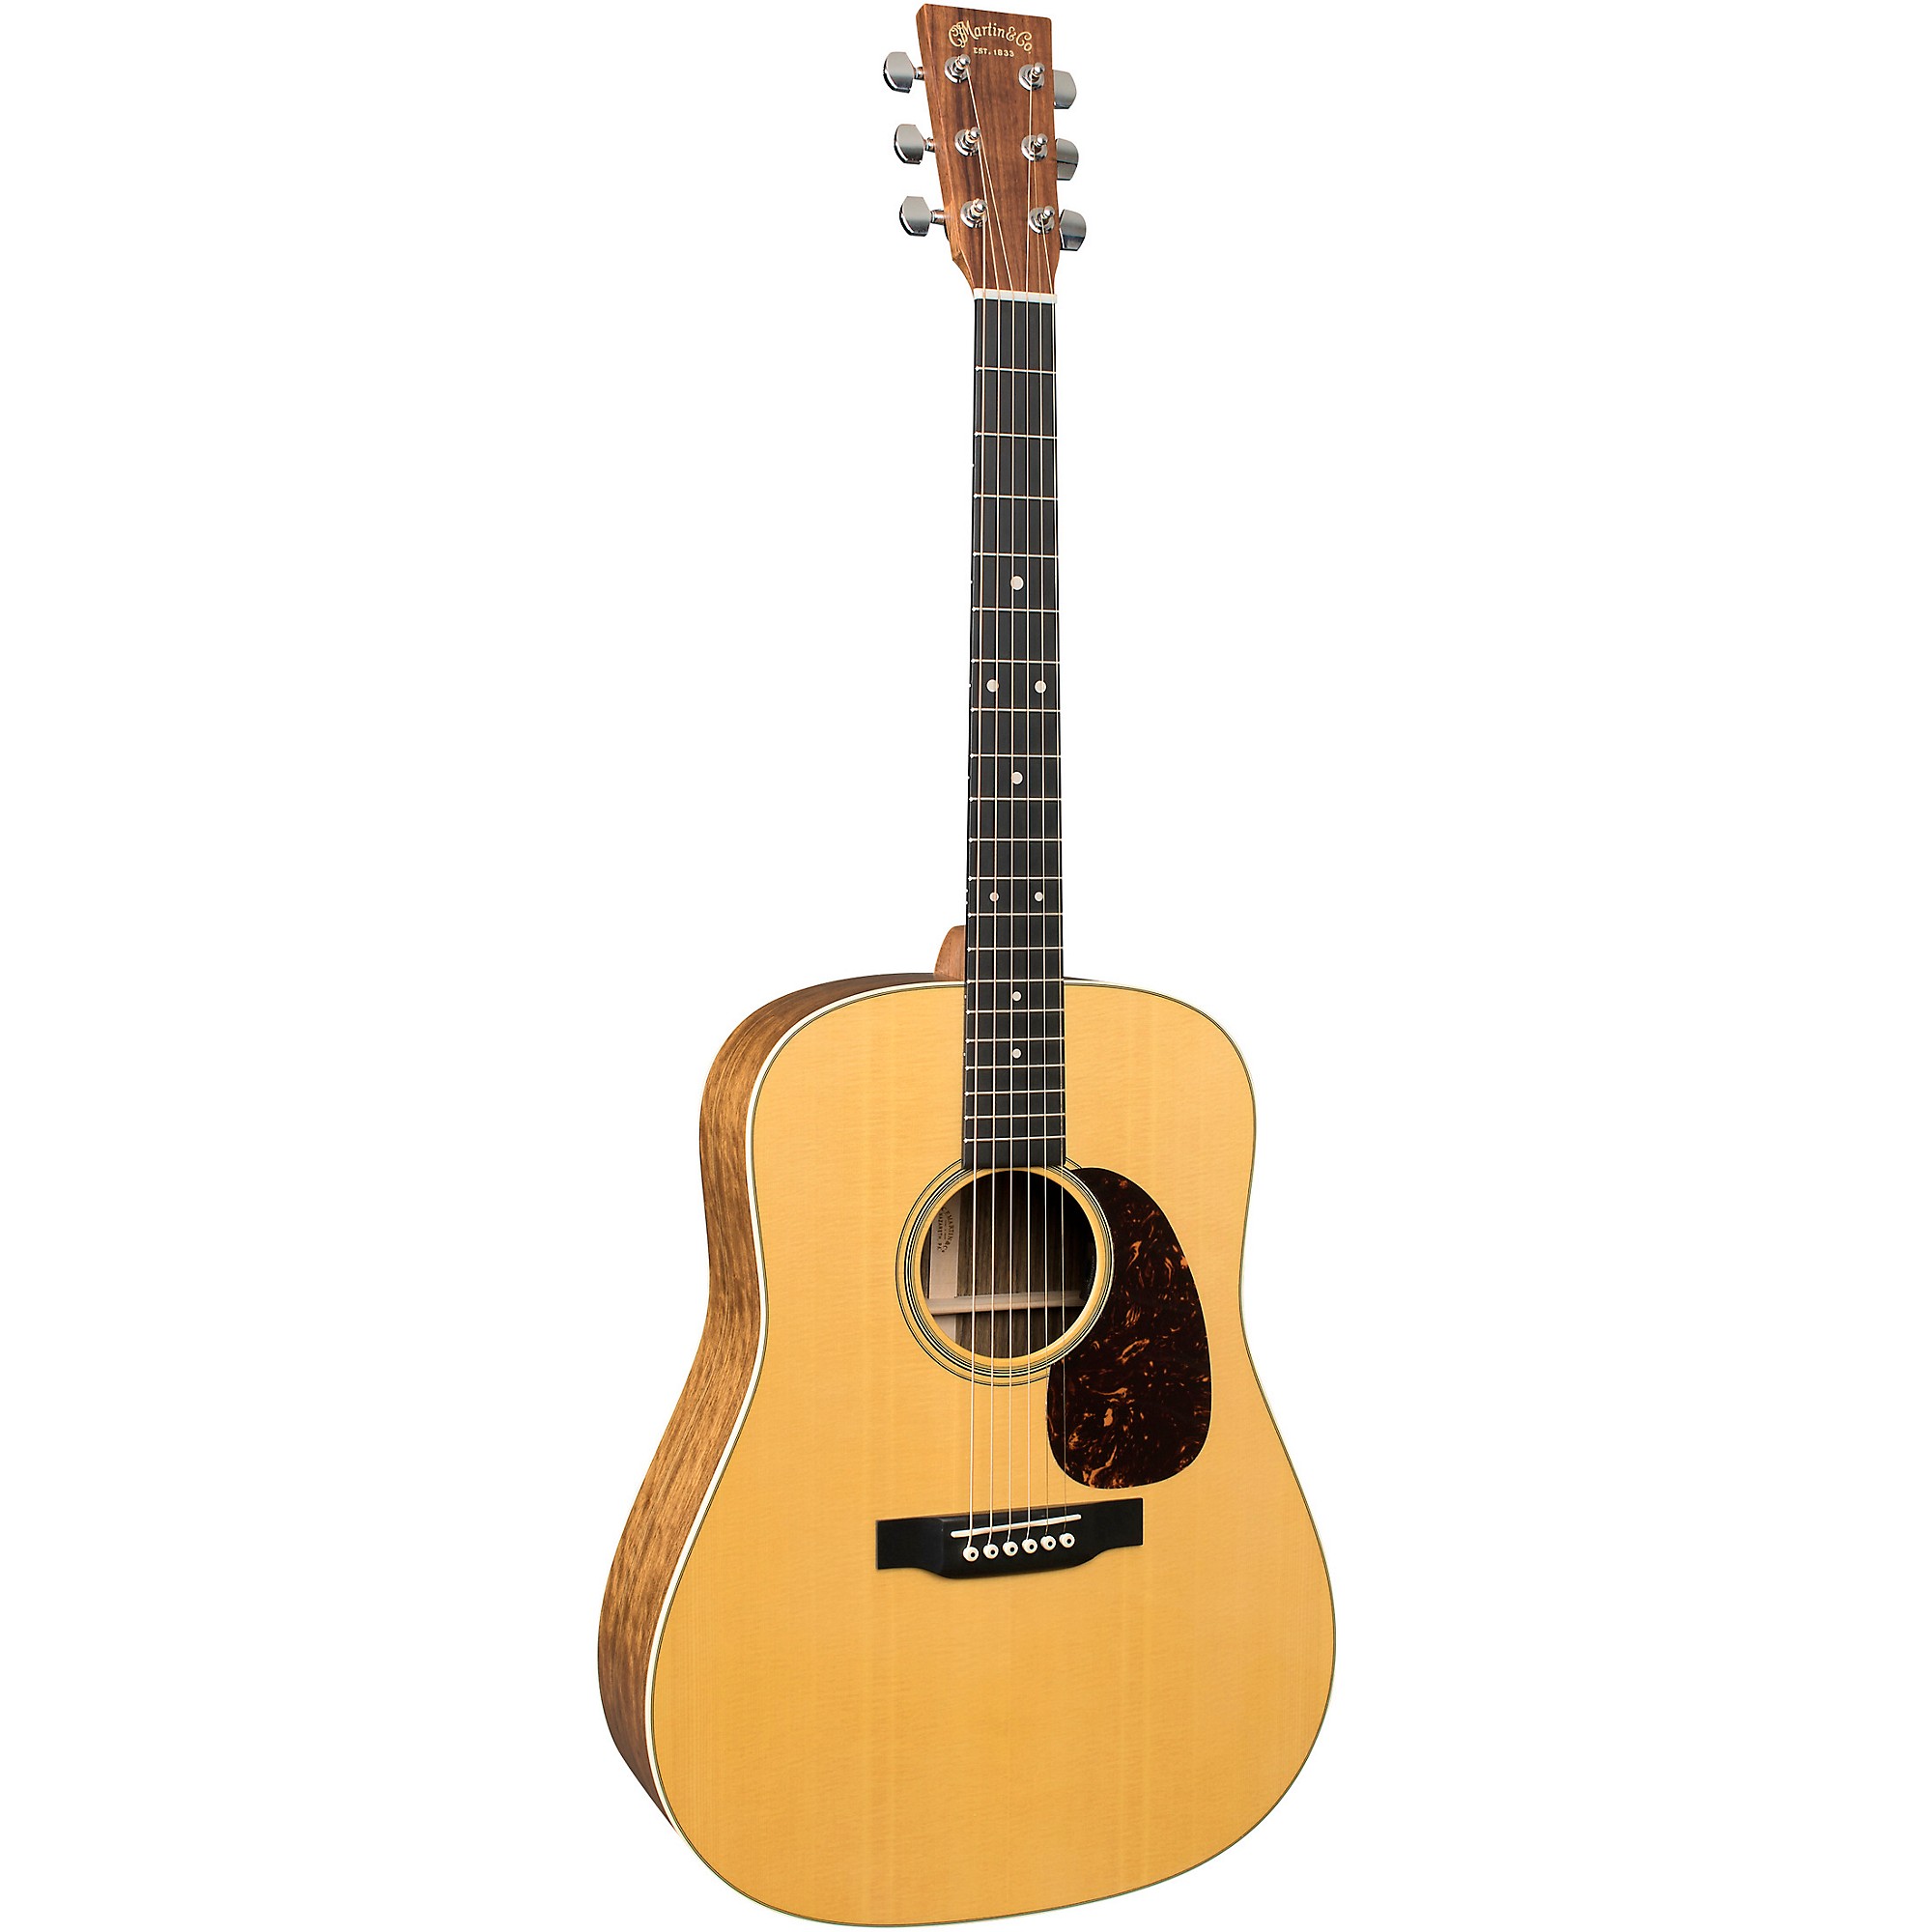 Martin Made in USA Special D Ovangkol Dreadnought Acoustic-Electric Guitar Natural $1000 (38% off) or $920 with Rewards + free S&H